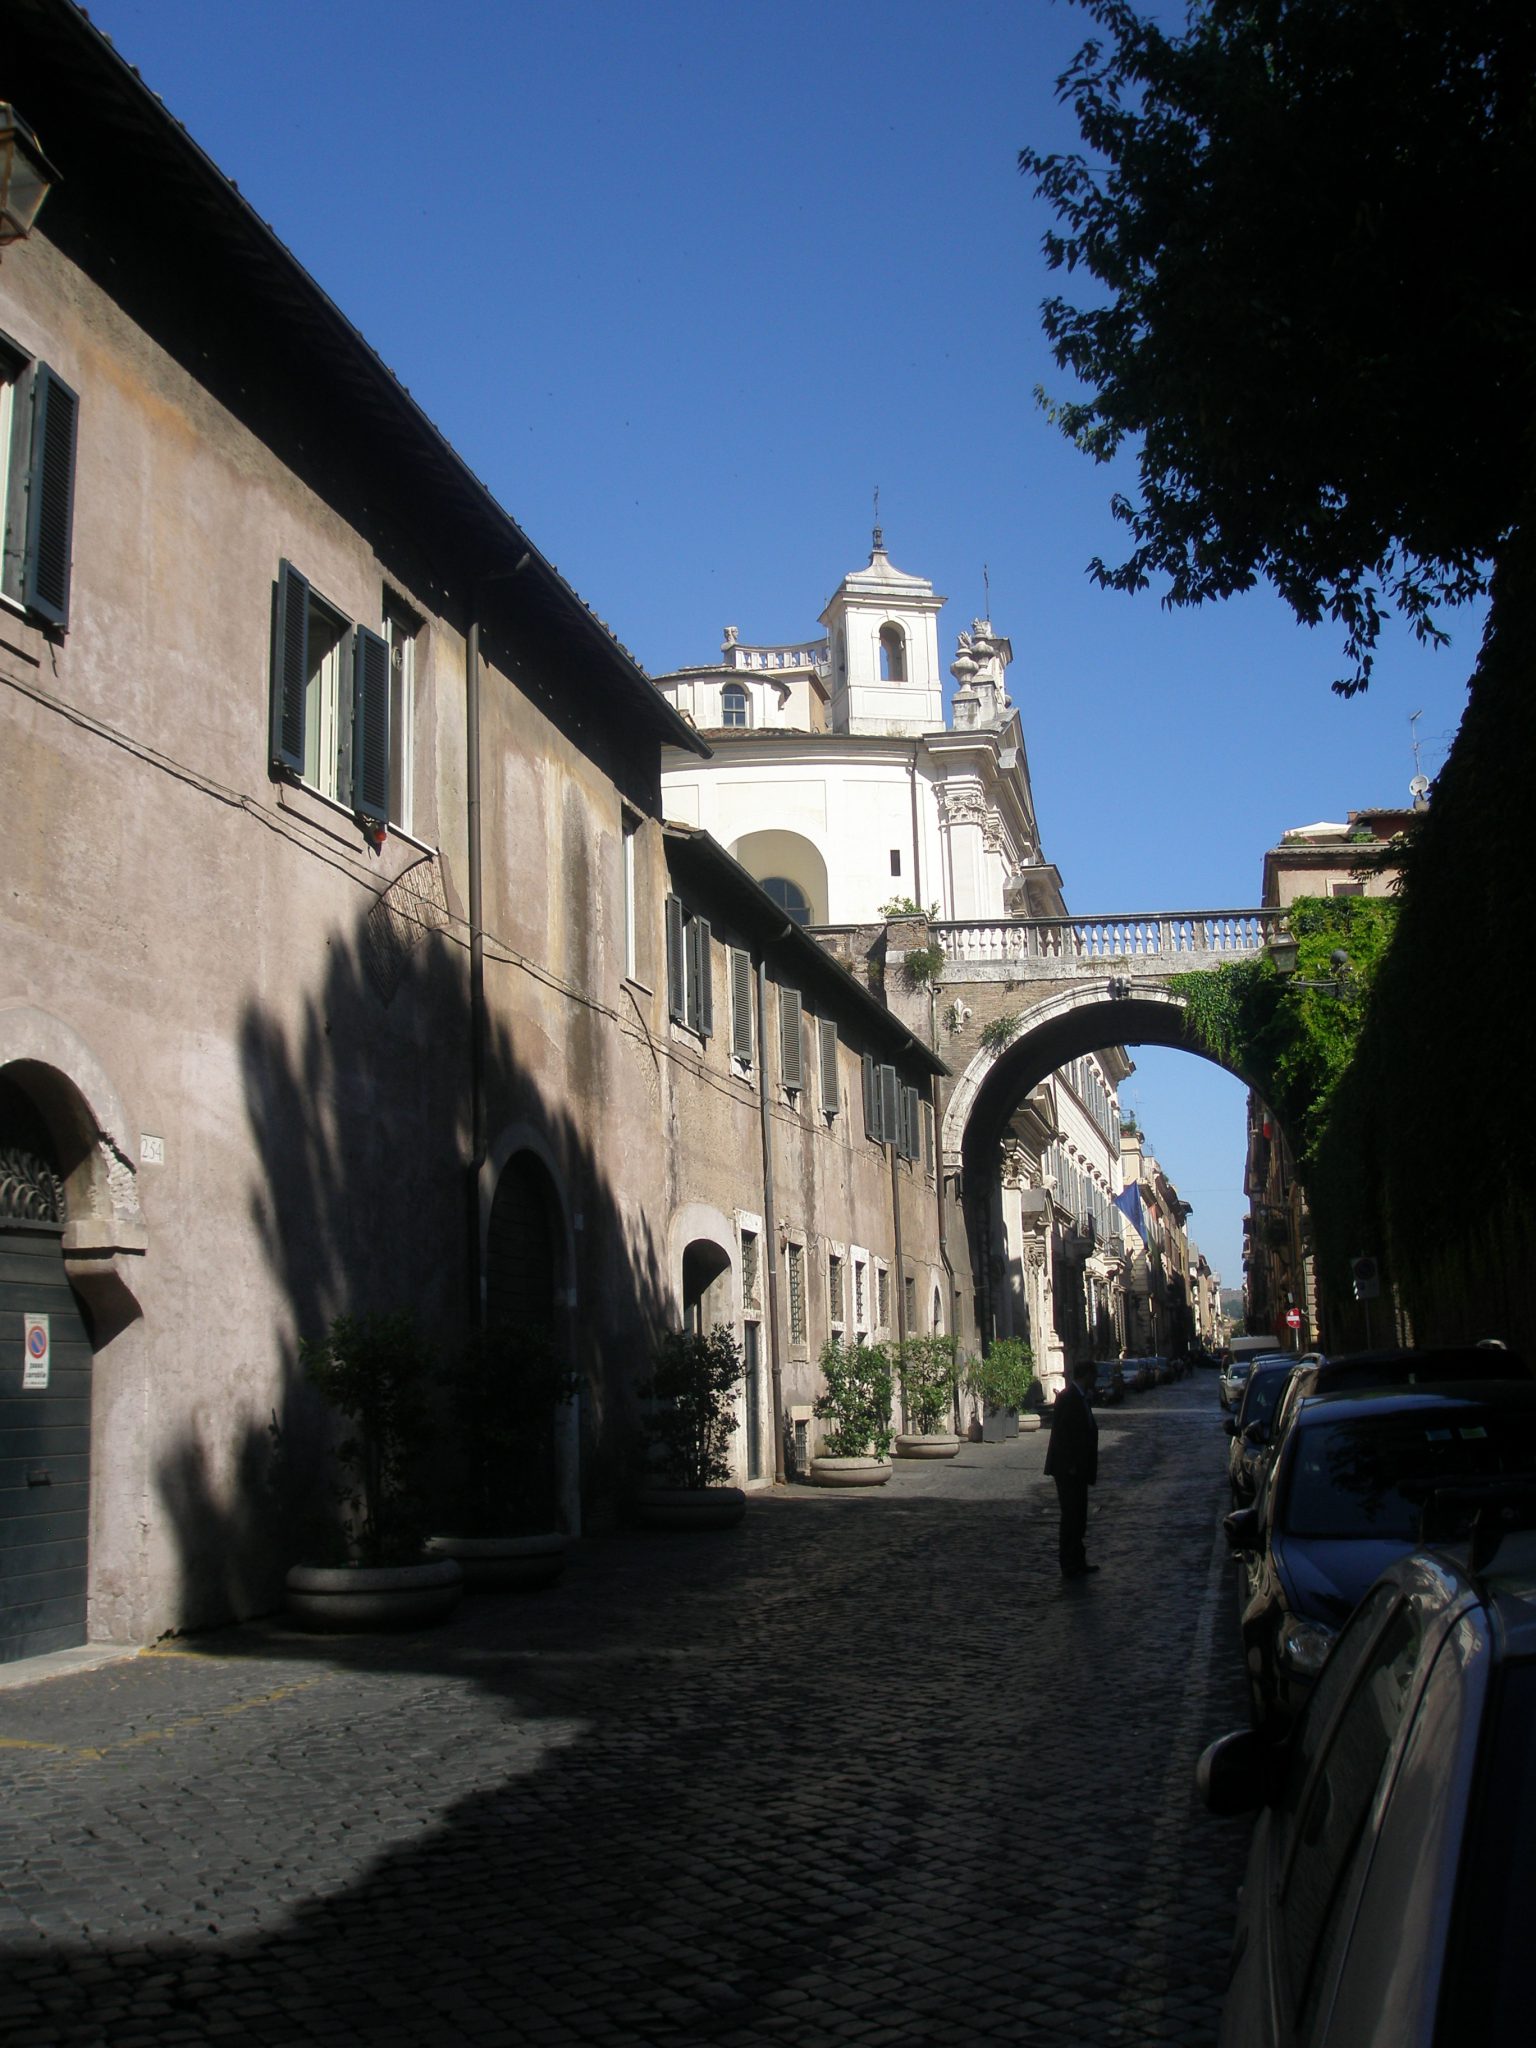 Michelangelo's Arco Farnese, at the southern end of Via Giulia, as I saw it in June of 2011.